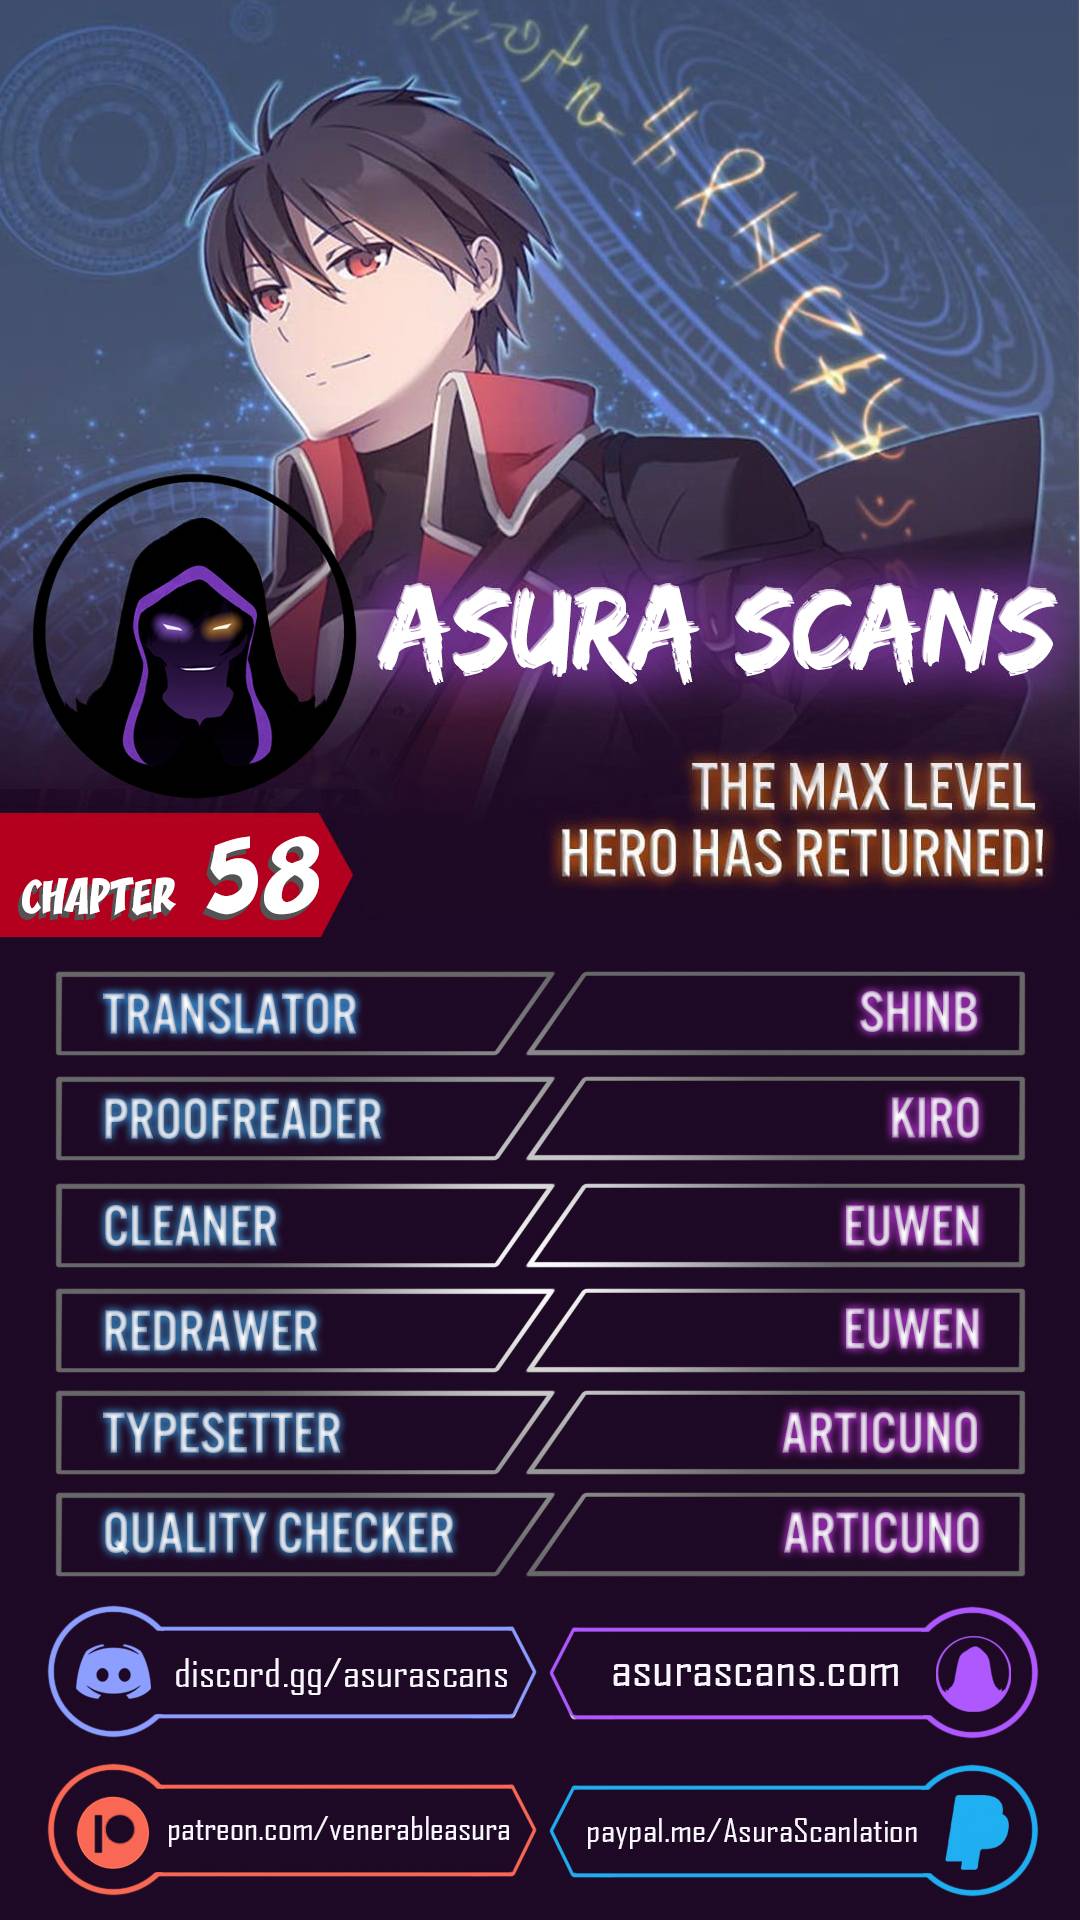 The MAX leveled hero will return! Chapter 58